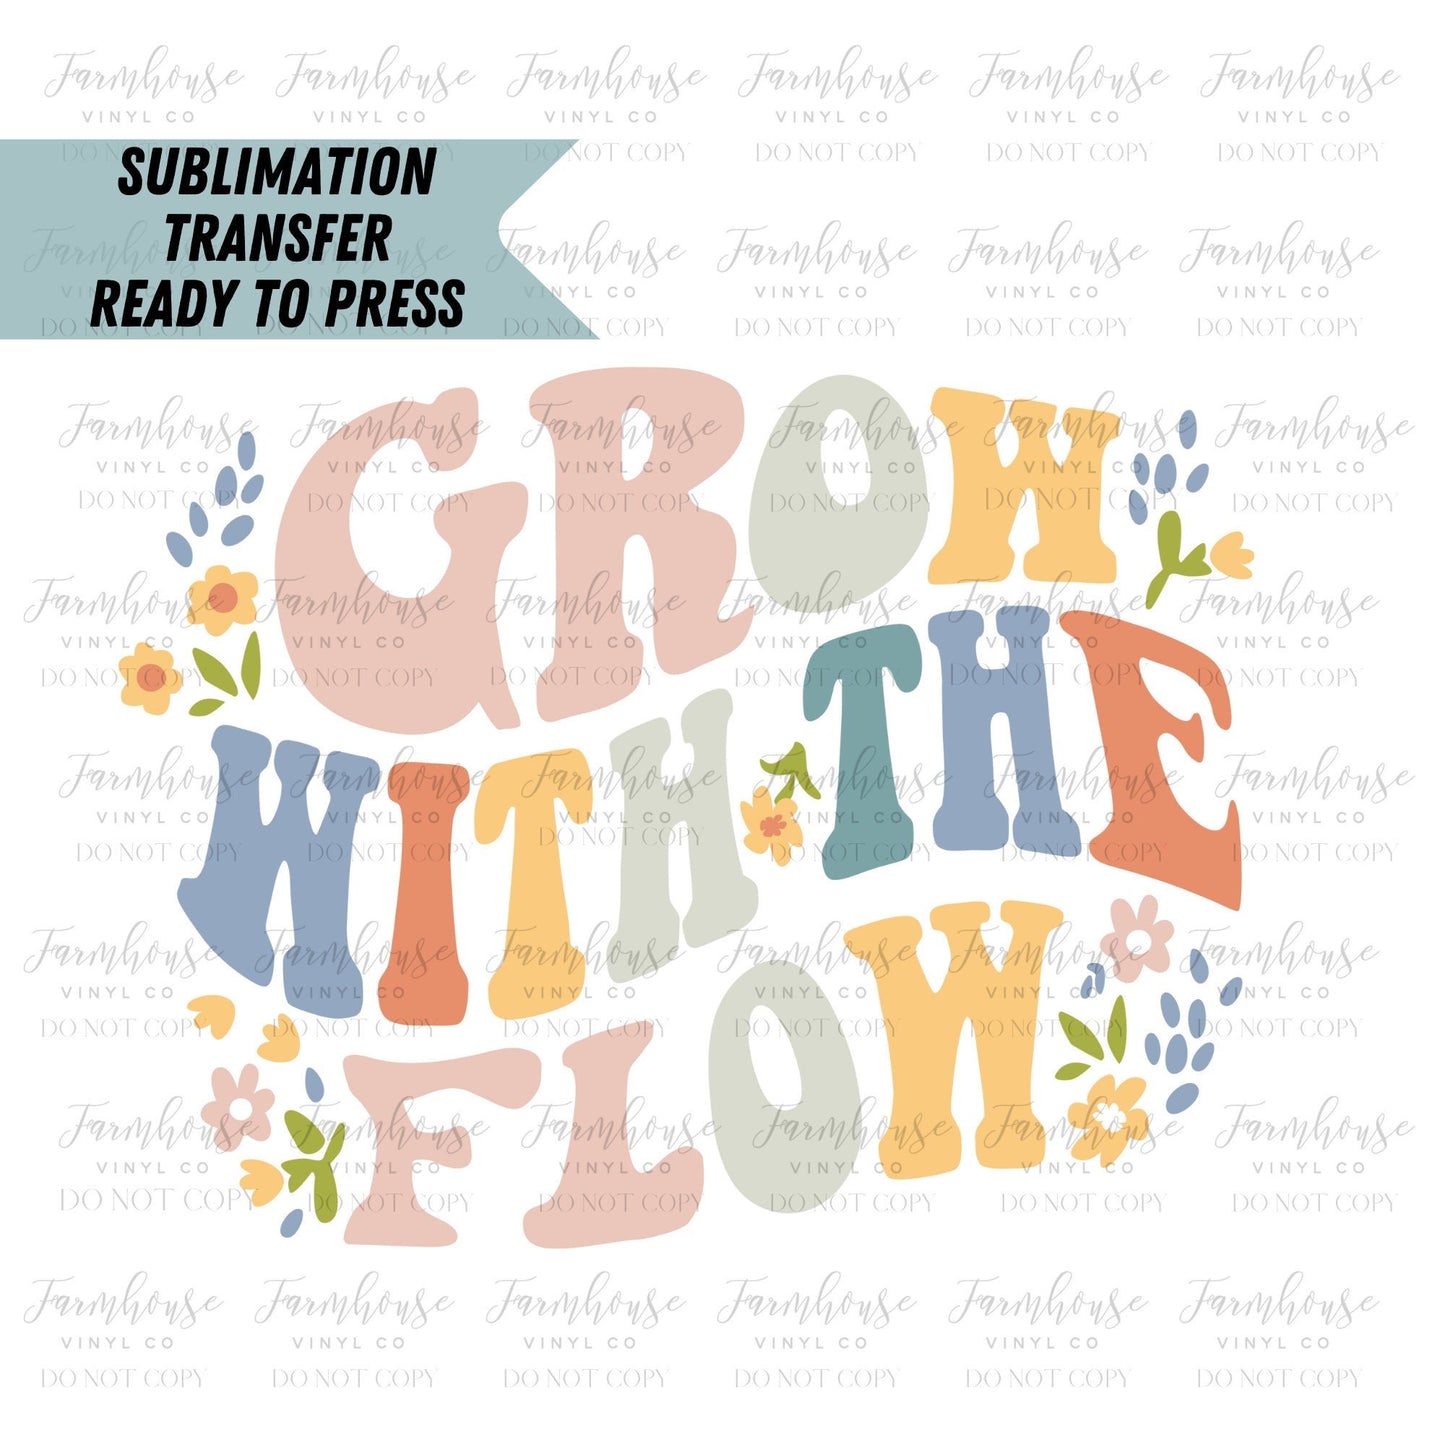 Grow with the Flow Ready to Press Sublimation Transfer - Farmhouse Vinyl Co